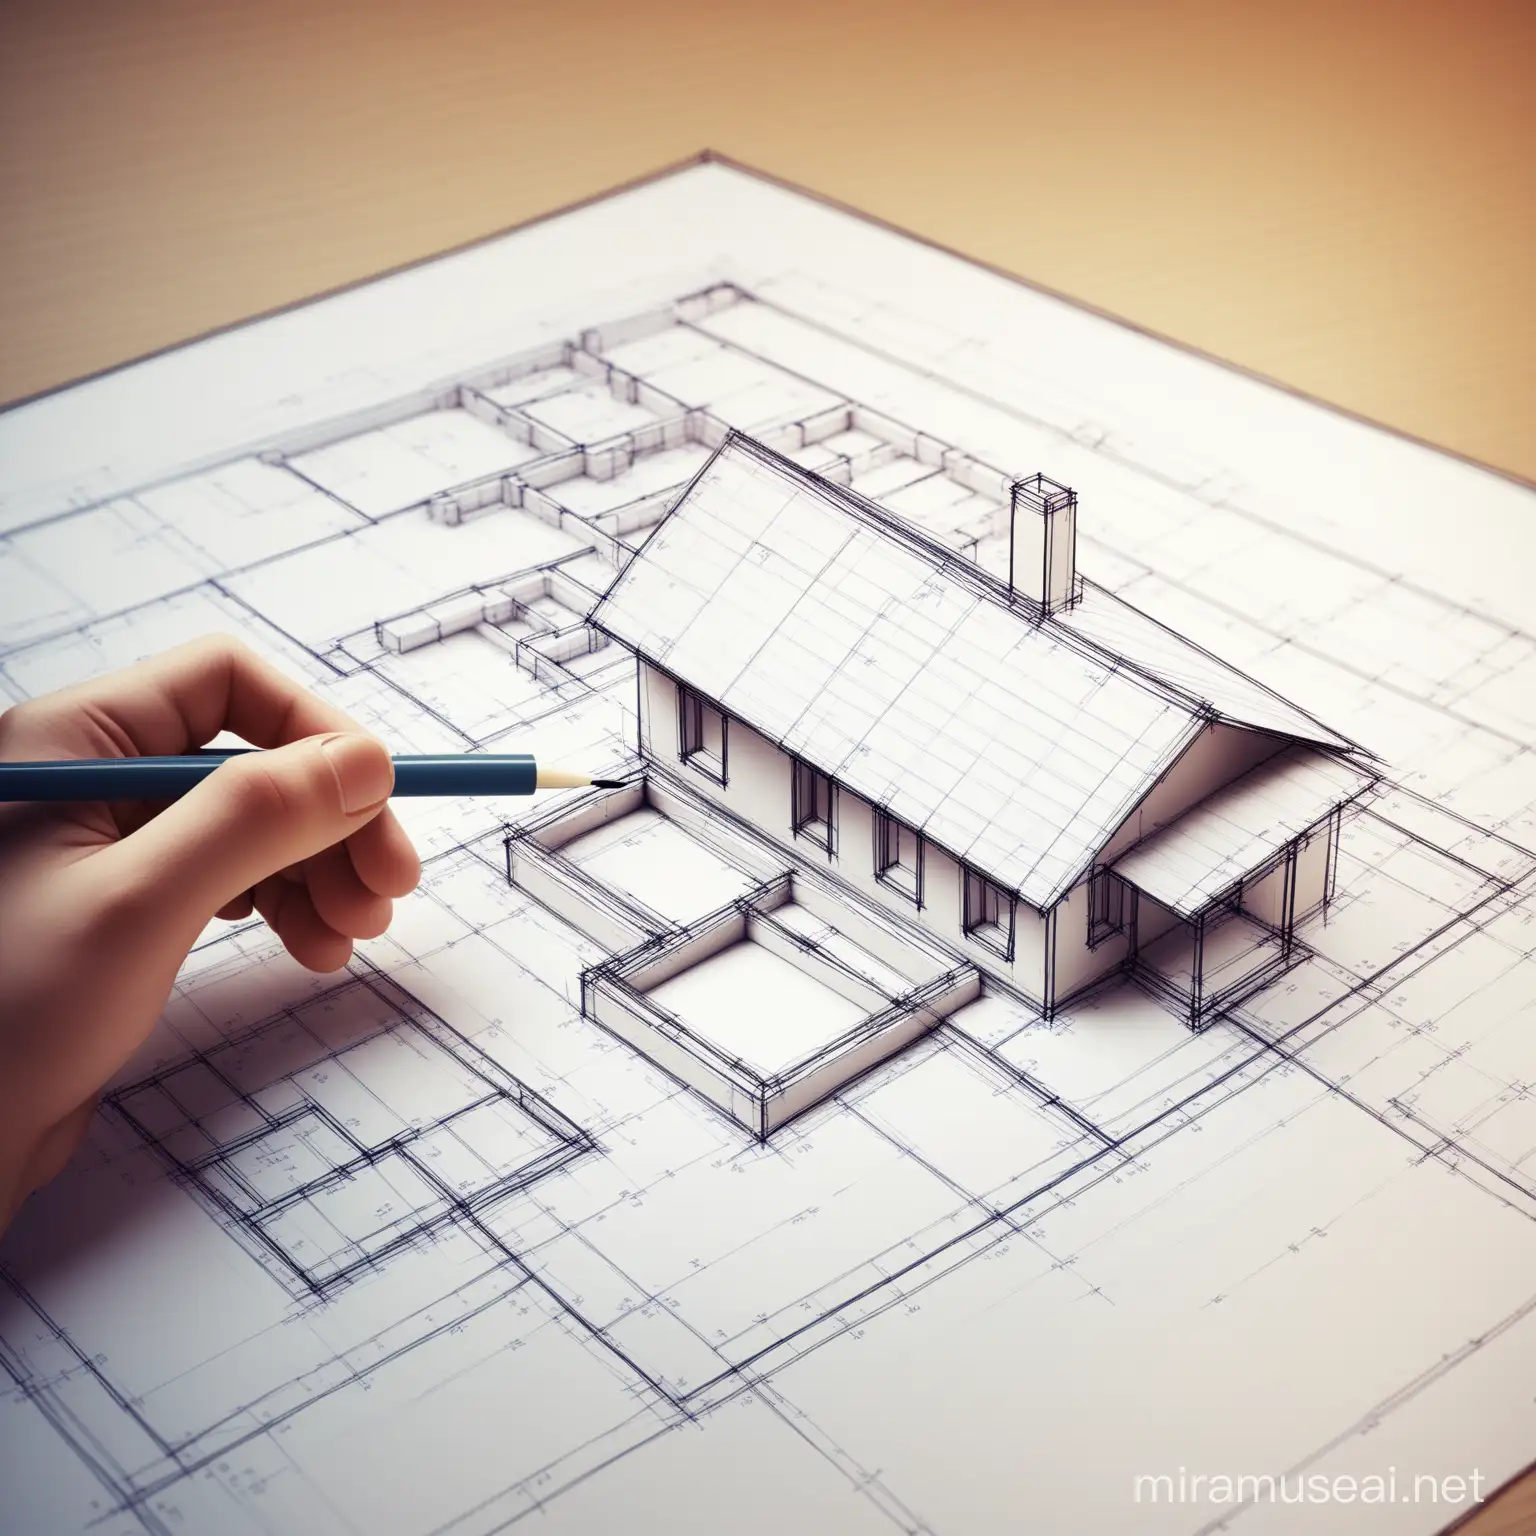 An Architect is sketch a 3D plan for a house